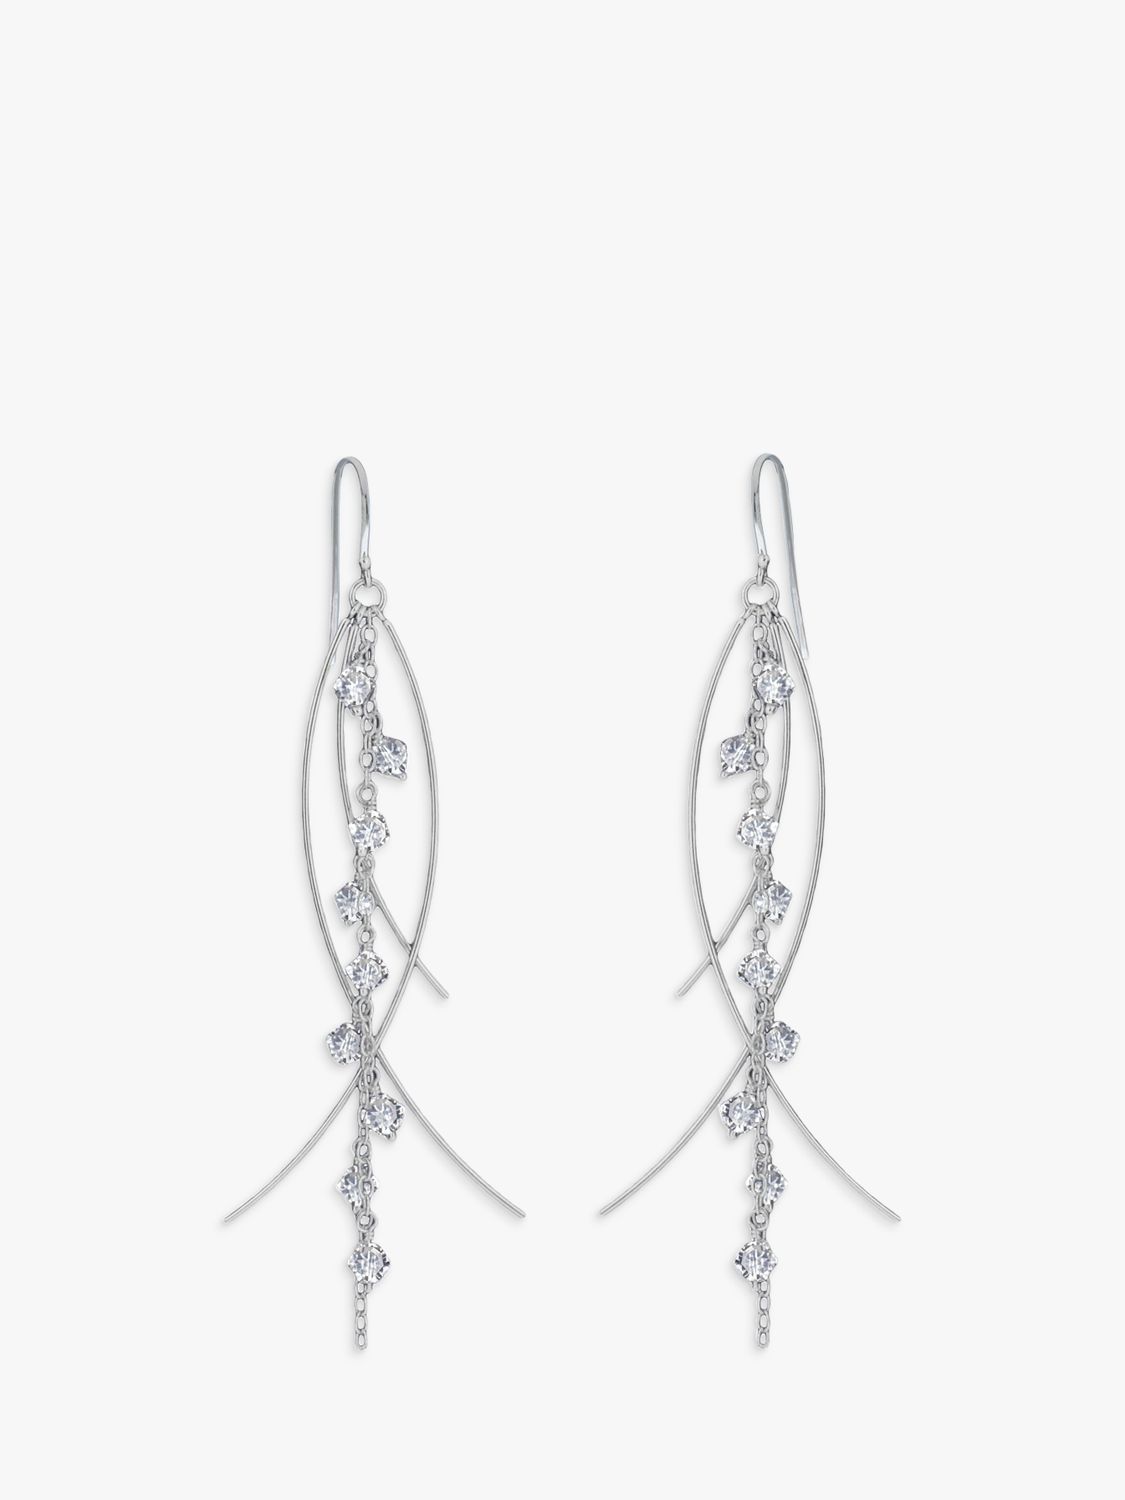 Nina B Sterling Silver and Clear Crystal Drop Earrings, Silver/Clear